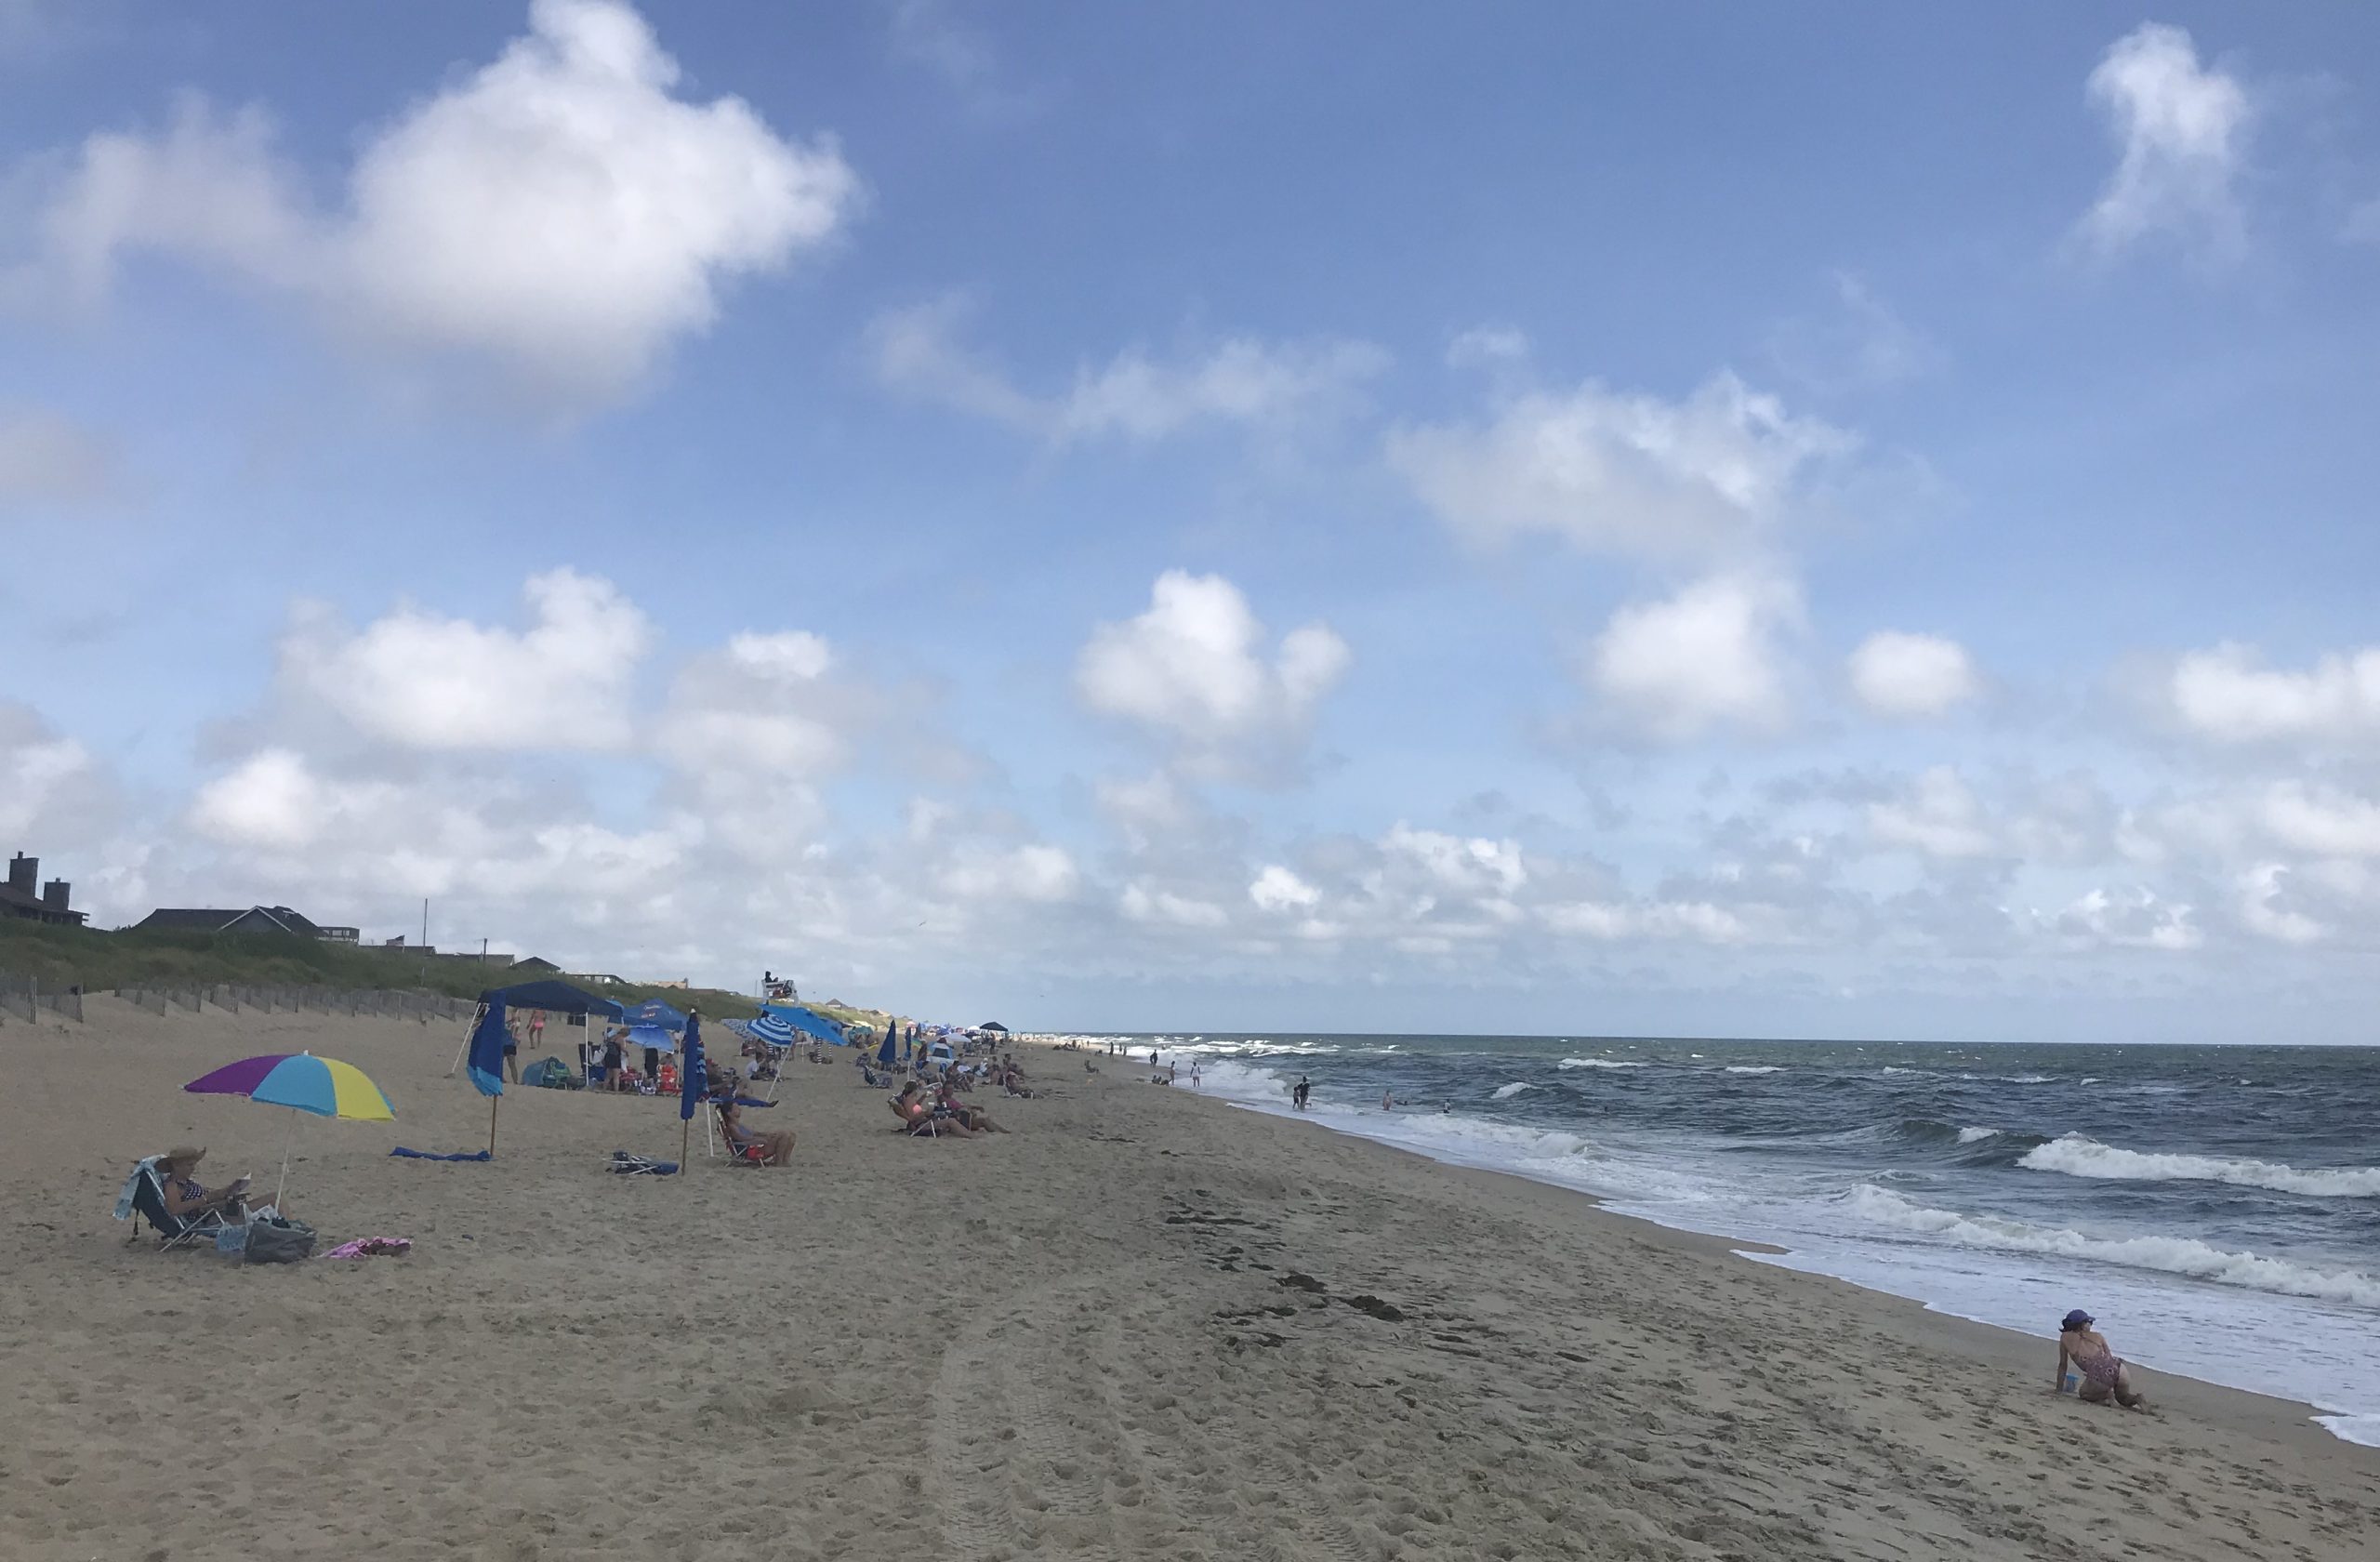 Beachgoers are shown in Nags Head. Photo: File